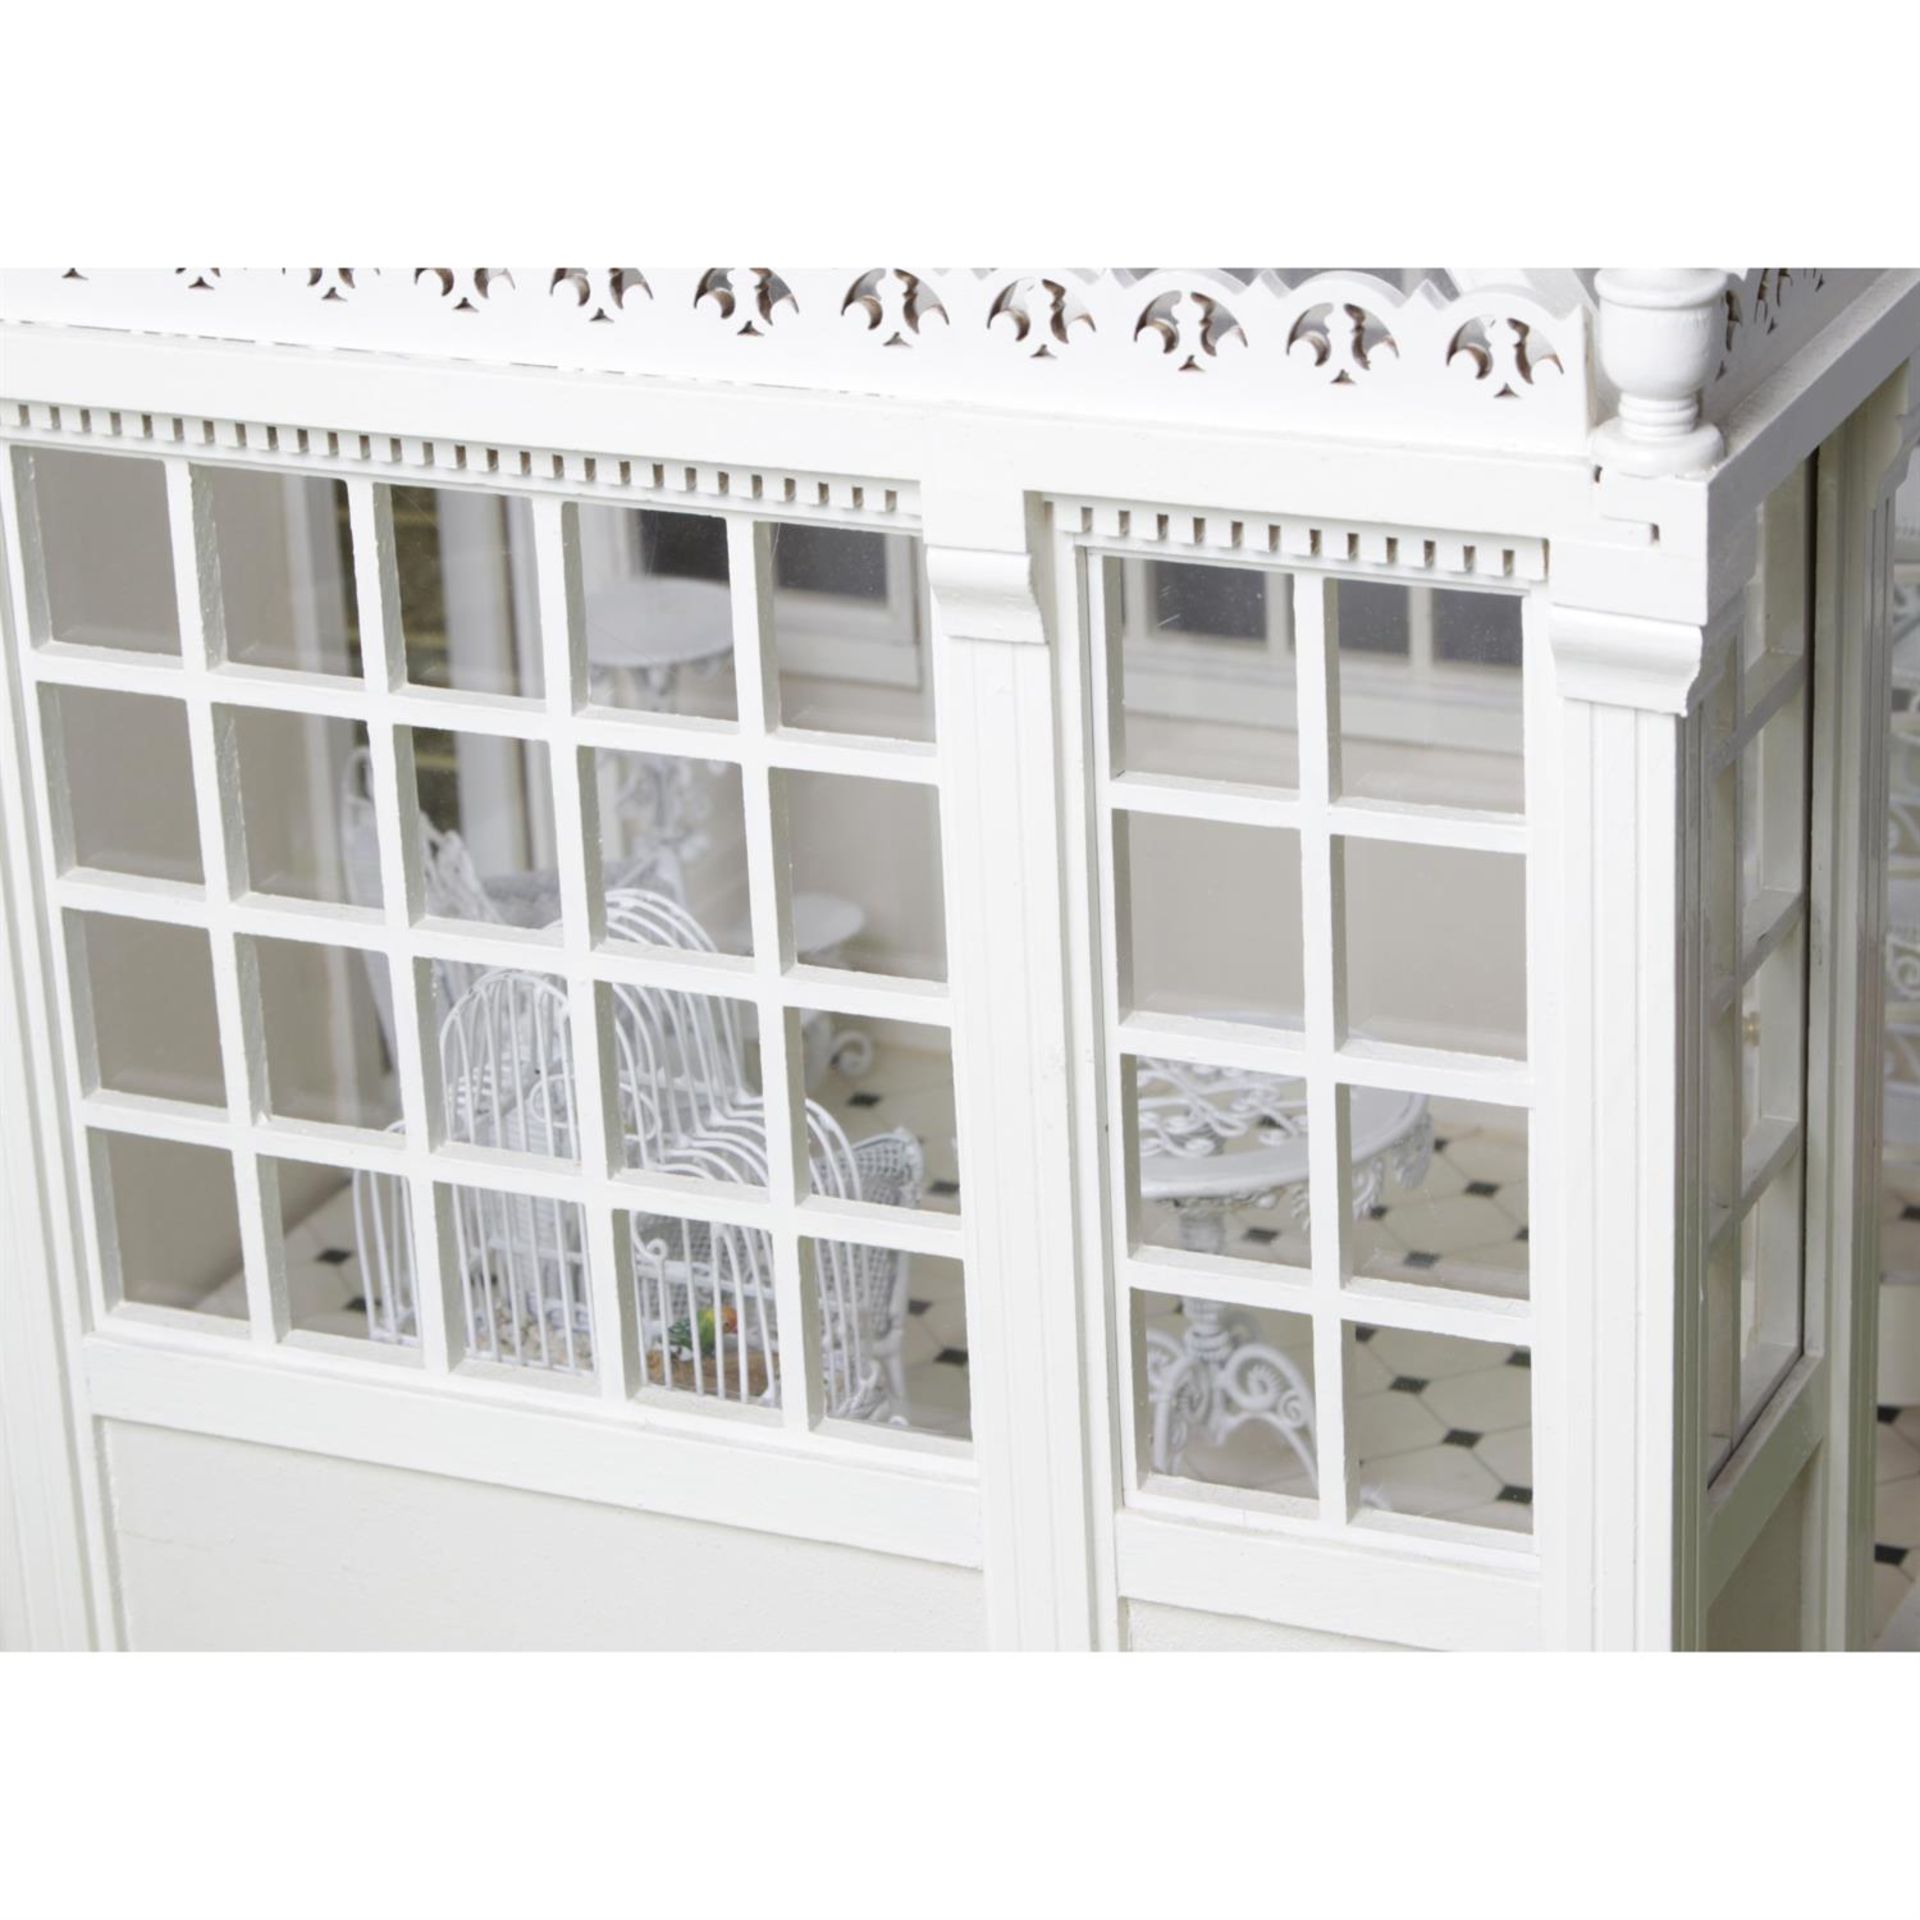 A large wooden dolls house. - Image 7 of 8